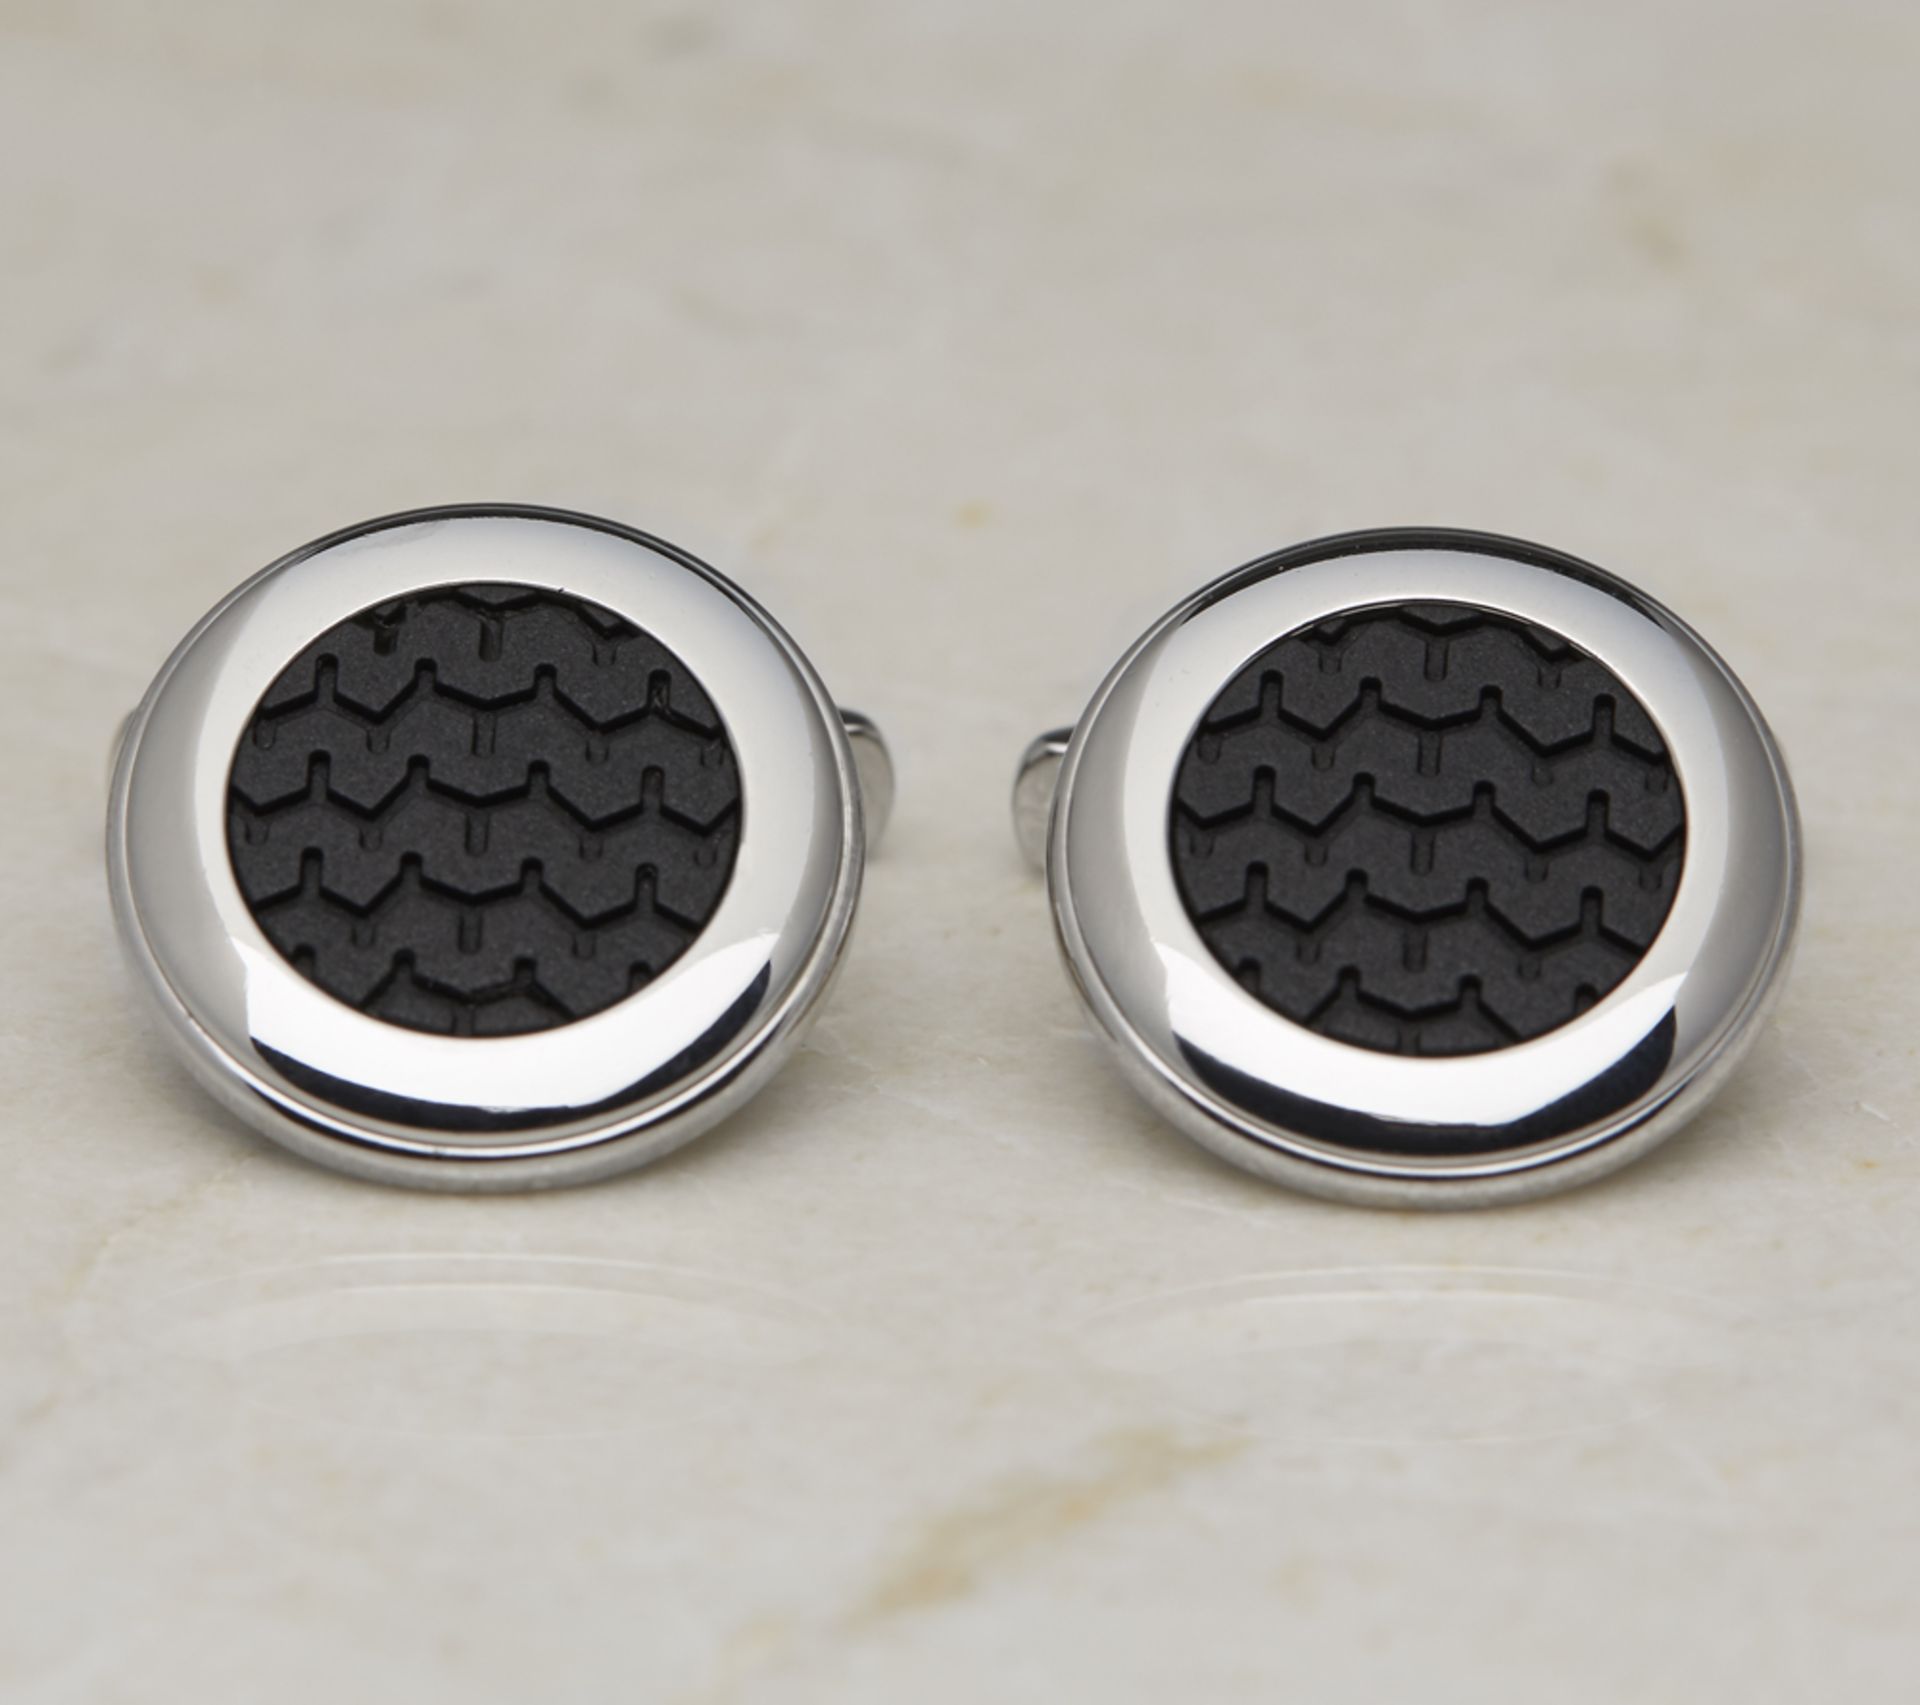 Stainless Steel Black Rubber Mille Miglia Cufflinks - Image 4 of 4